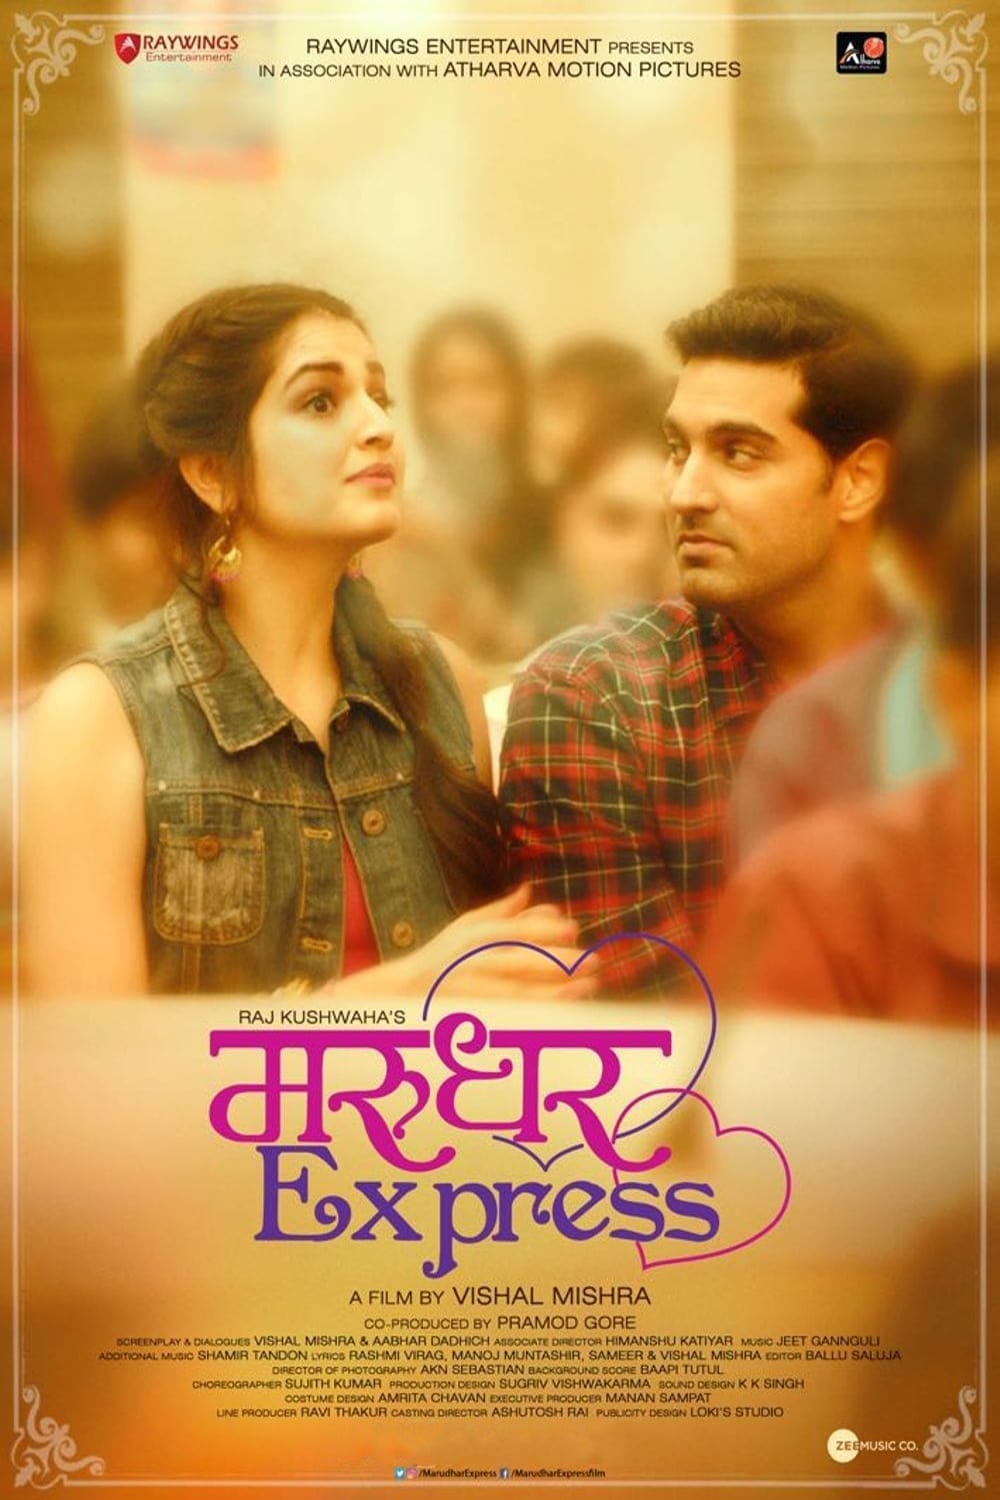 Poster for the movie "Marudhar Express"